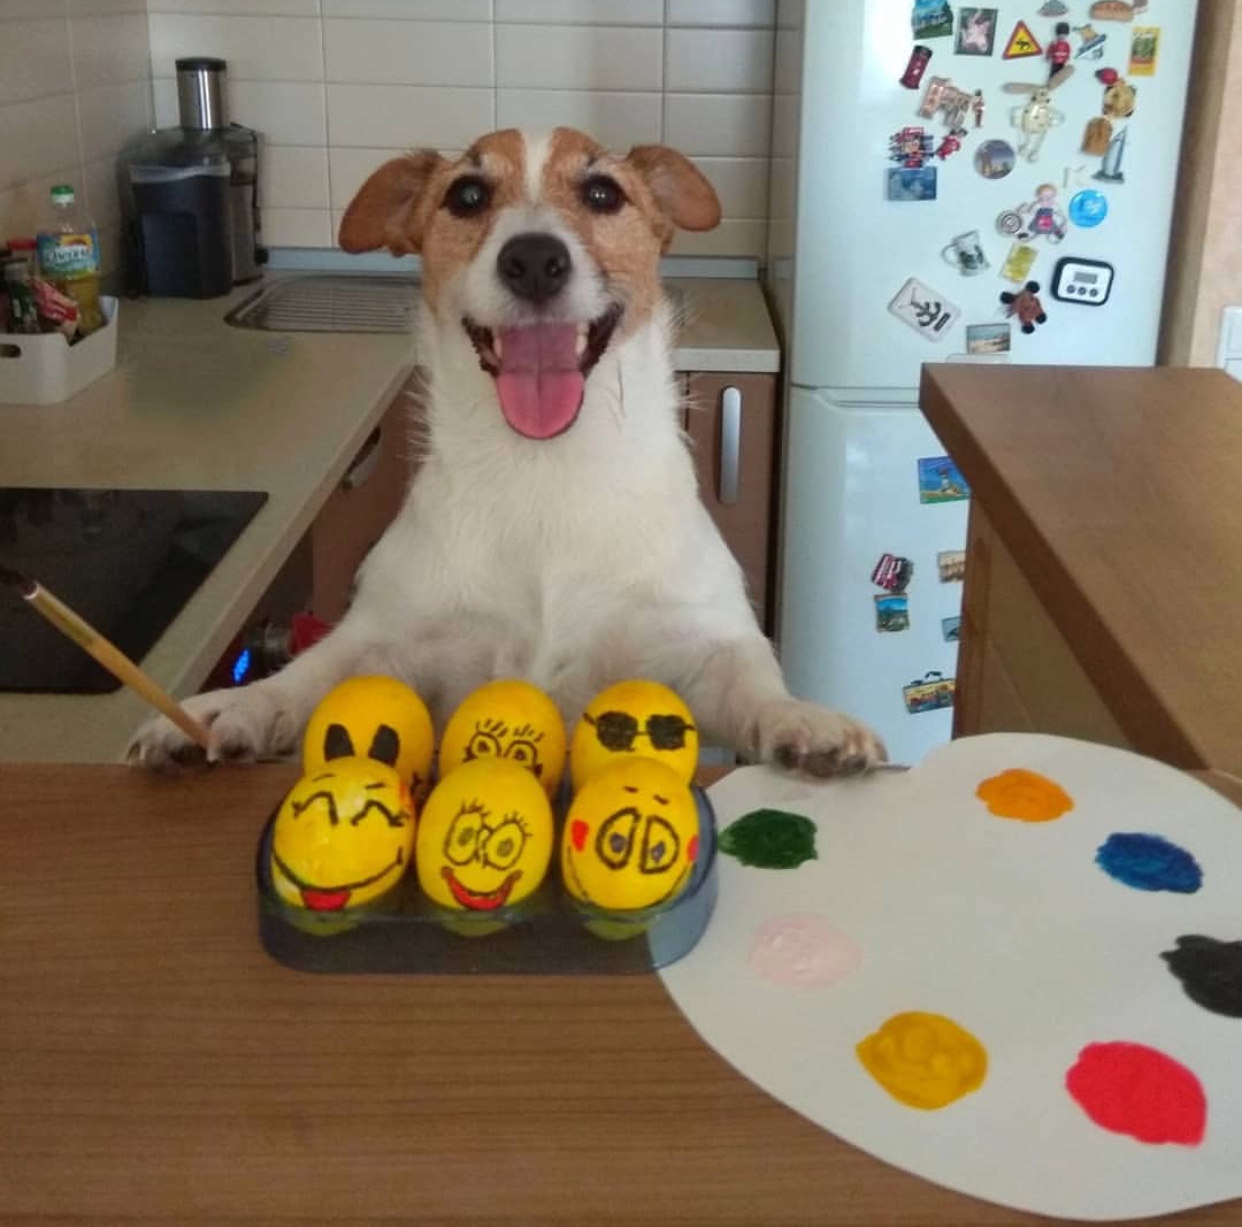 Jack Russell Terrier standing up behind the easter eggs designed with emojis on top of the counter